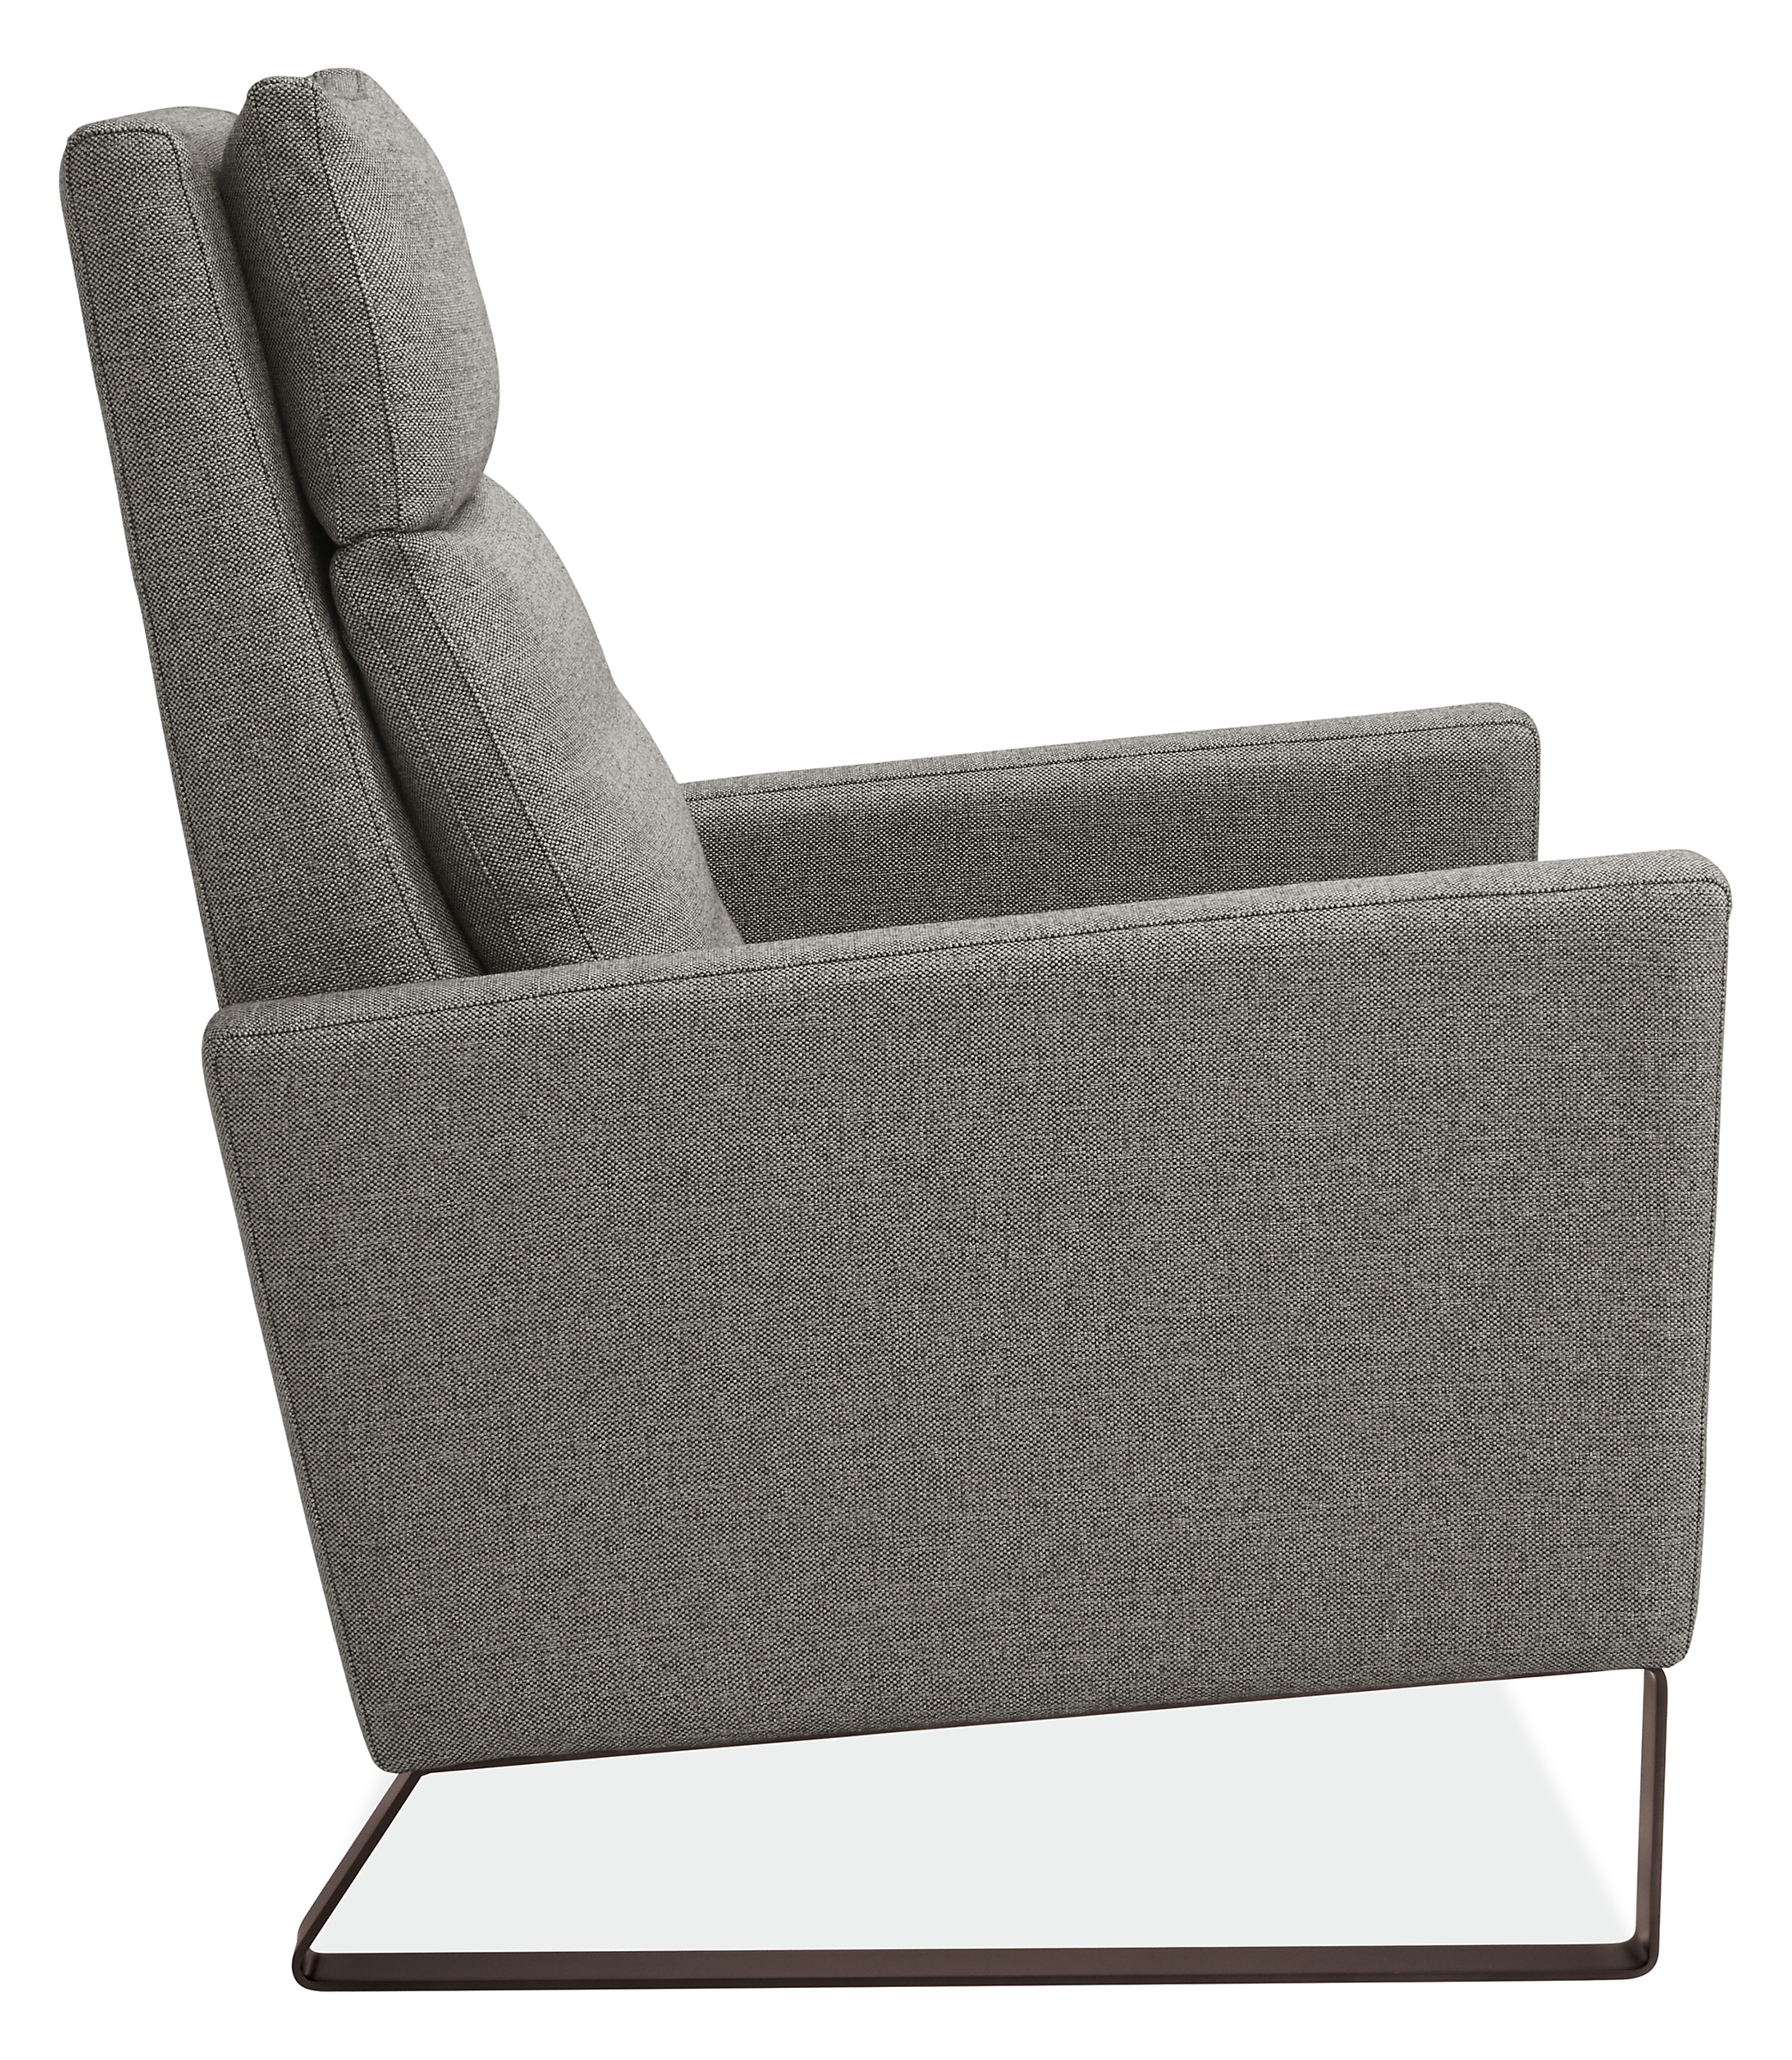 Side view of Isaac Select Recliner Thin-Arm in Sumner Fabric with Metal Base.